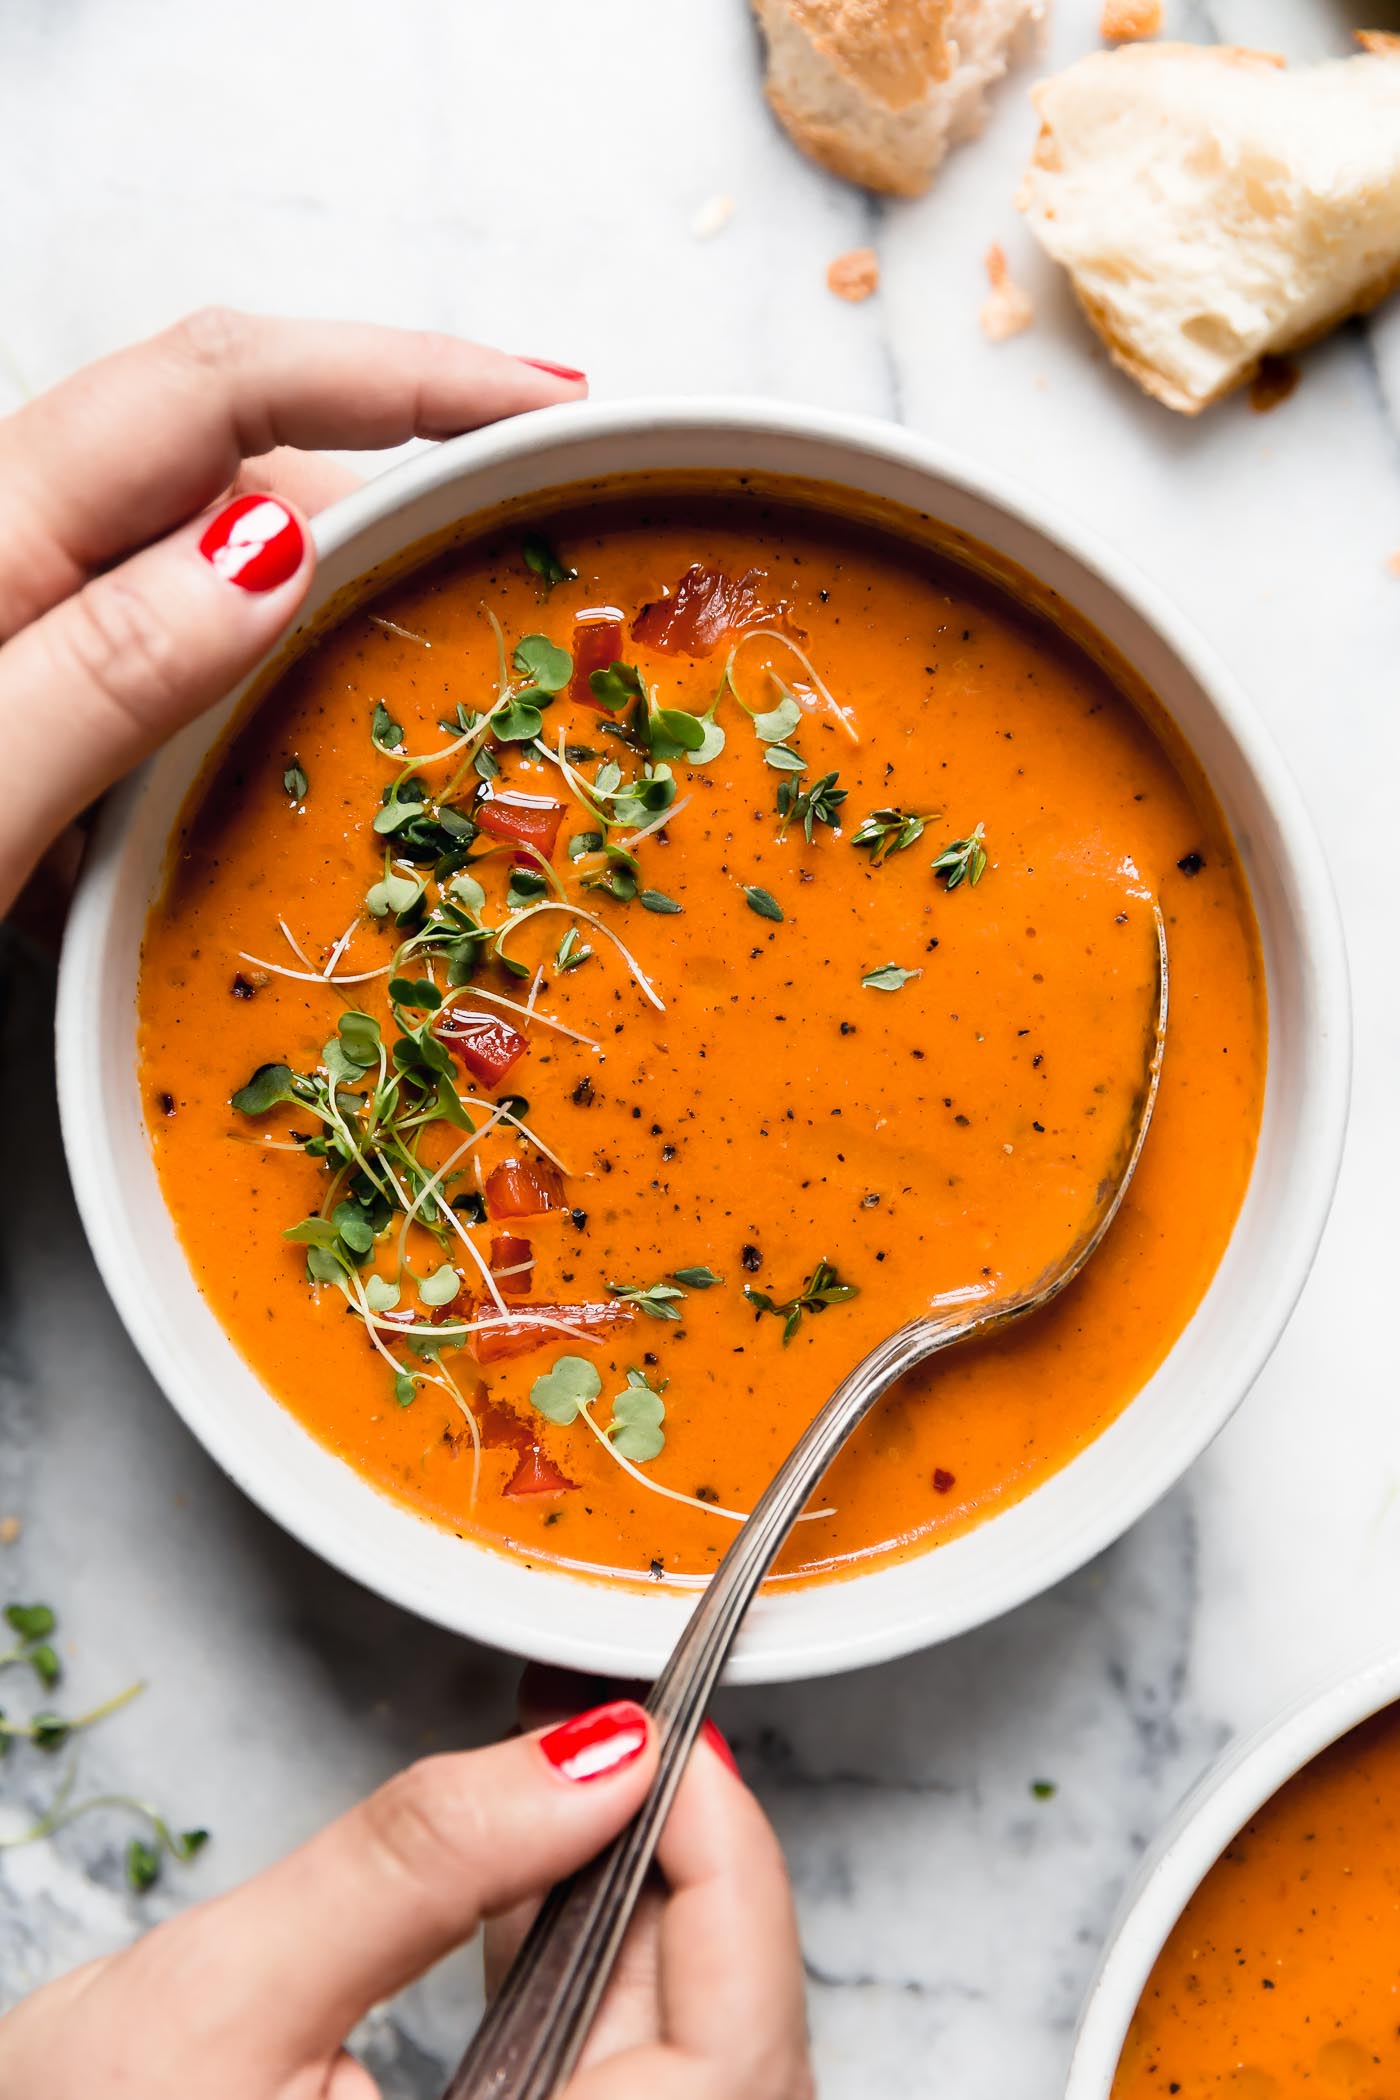 A woman's hands hold the sides of a white bowl filled with Roasted Red Pepper Soup. The bowl sits atop a gray and white marble surface with a few pieces of crusty bread and another white bowl filled with soup surrounding the bowl at center.